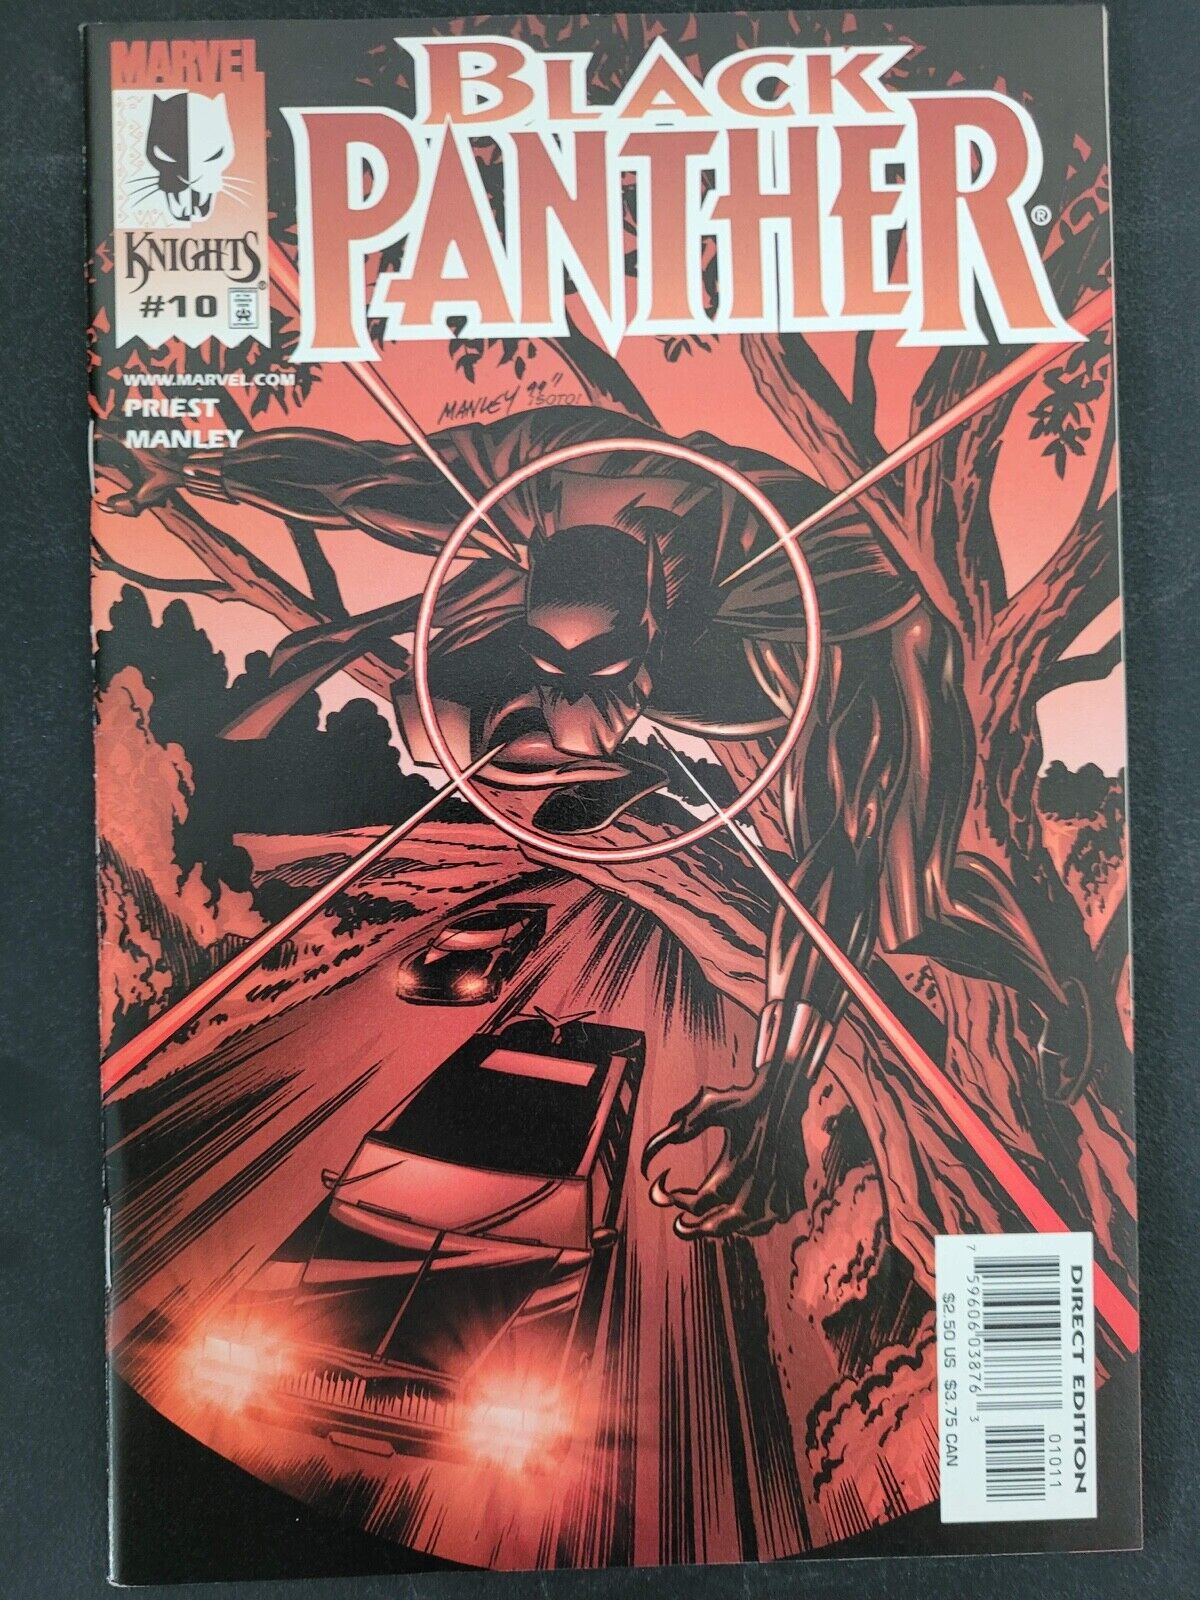 BLACK PANTHER #10 (1999) MARVEL KNIGHTS CHRISTOPHER PRIEST MIKE MANLEY ART